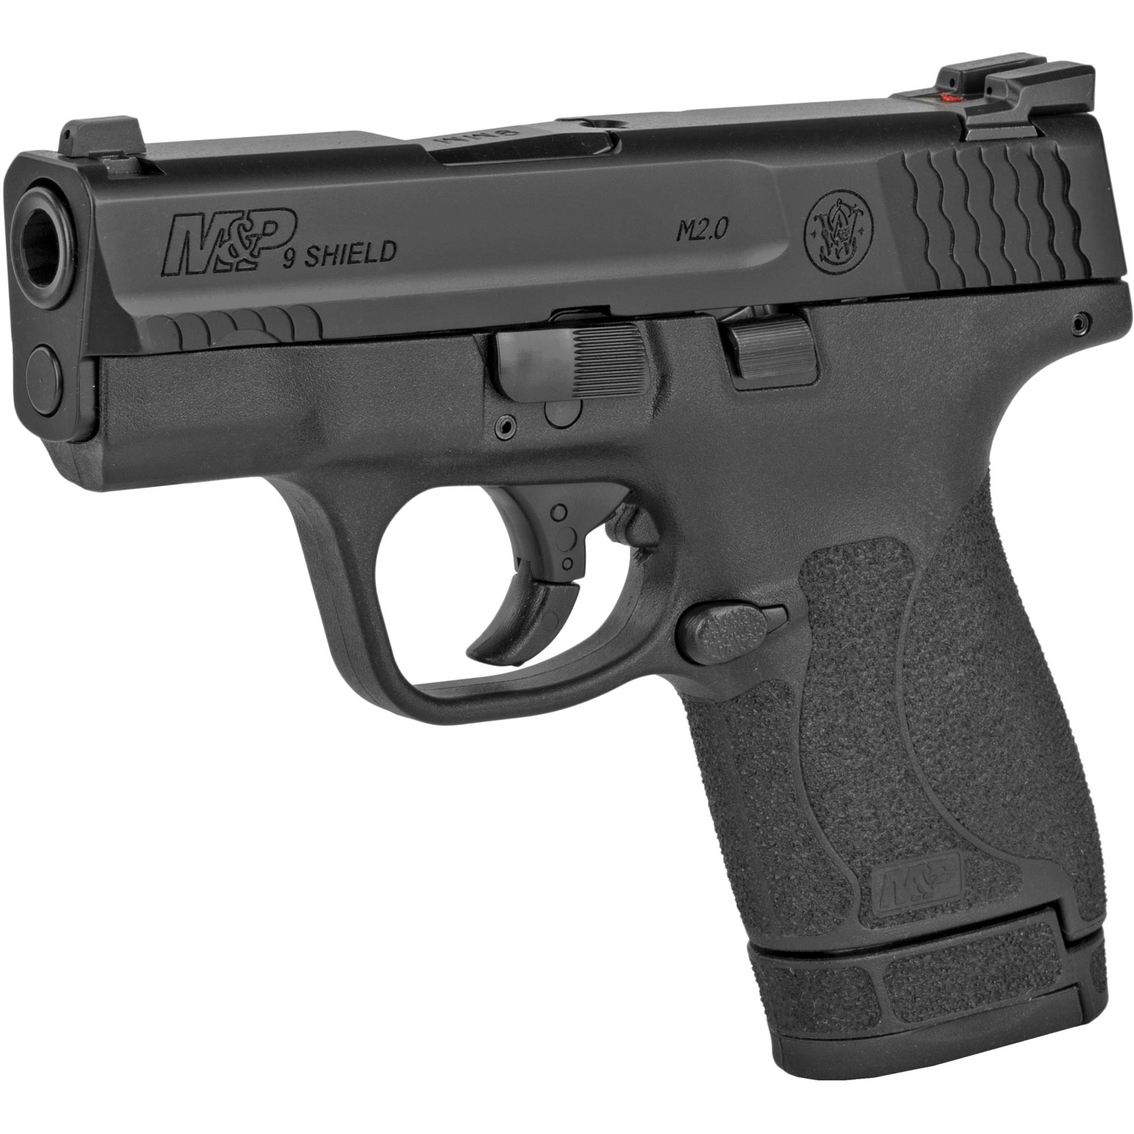 S&W Shield M2.0 9MM 3.1 in. Barrel 8 Rds 3-Mags NS Pistol Black - Image 3 of 3